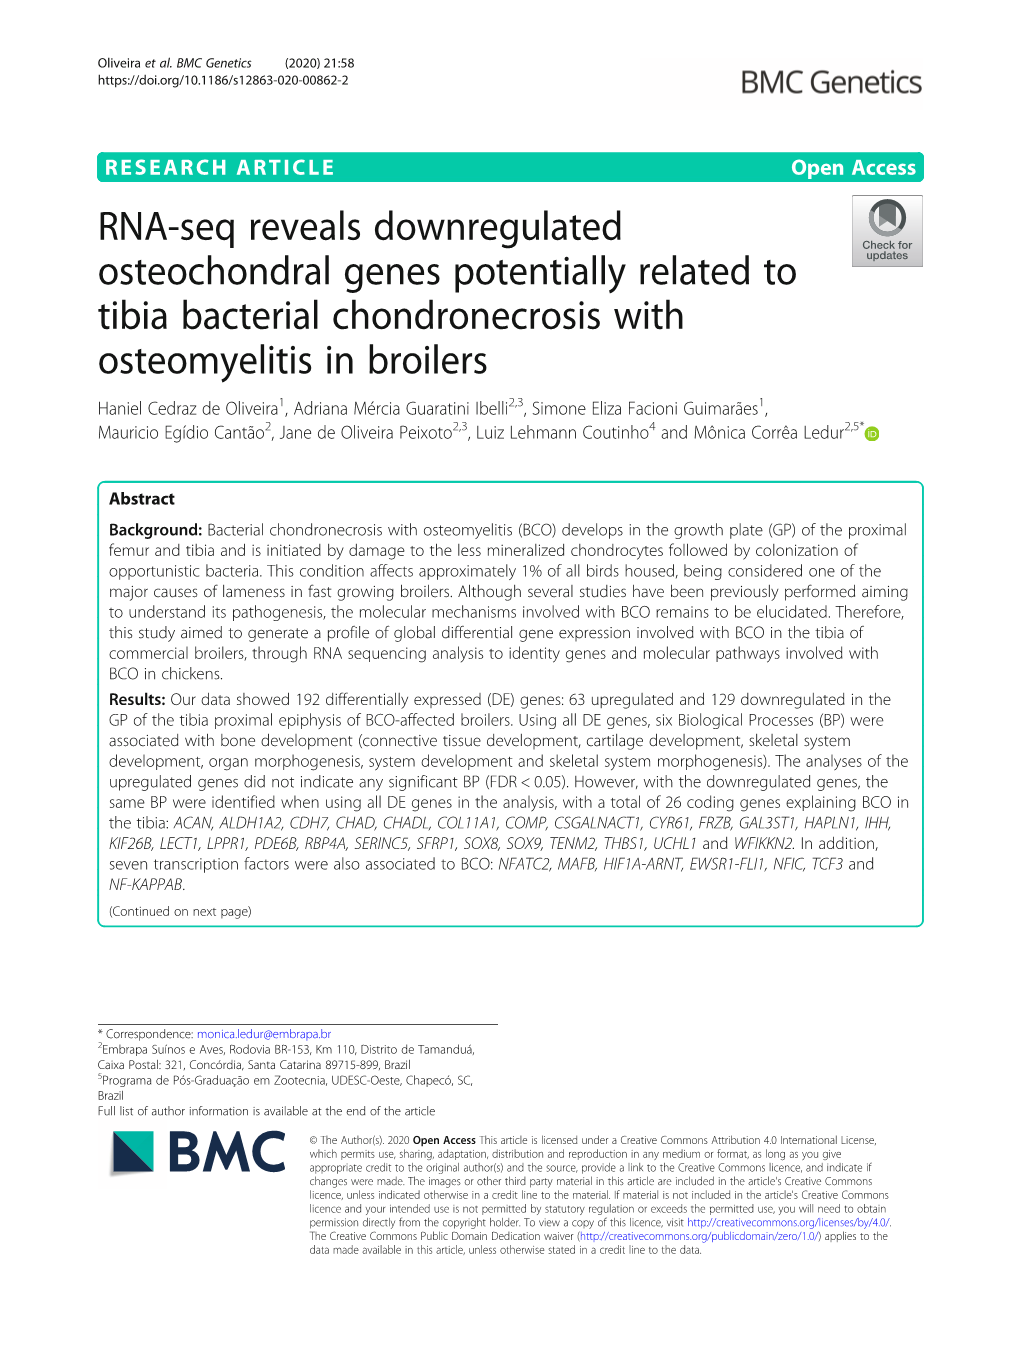 RNA-Seq Reveals Downregulated Osteochondral Genes Potentially Related to Tibia Bacterial Chondronecrosis with Osteomyelitis in B